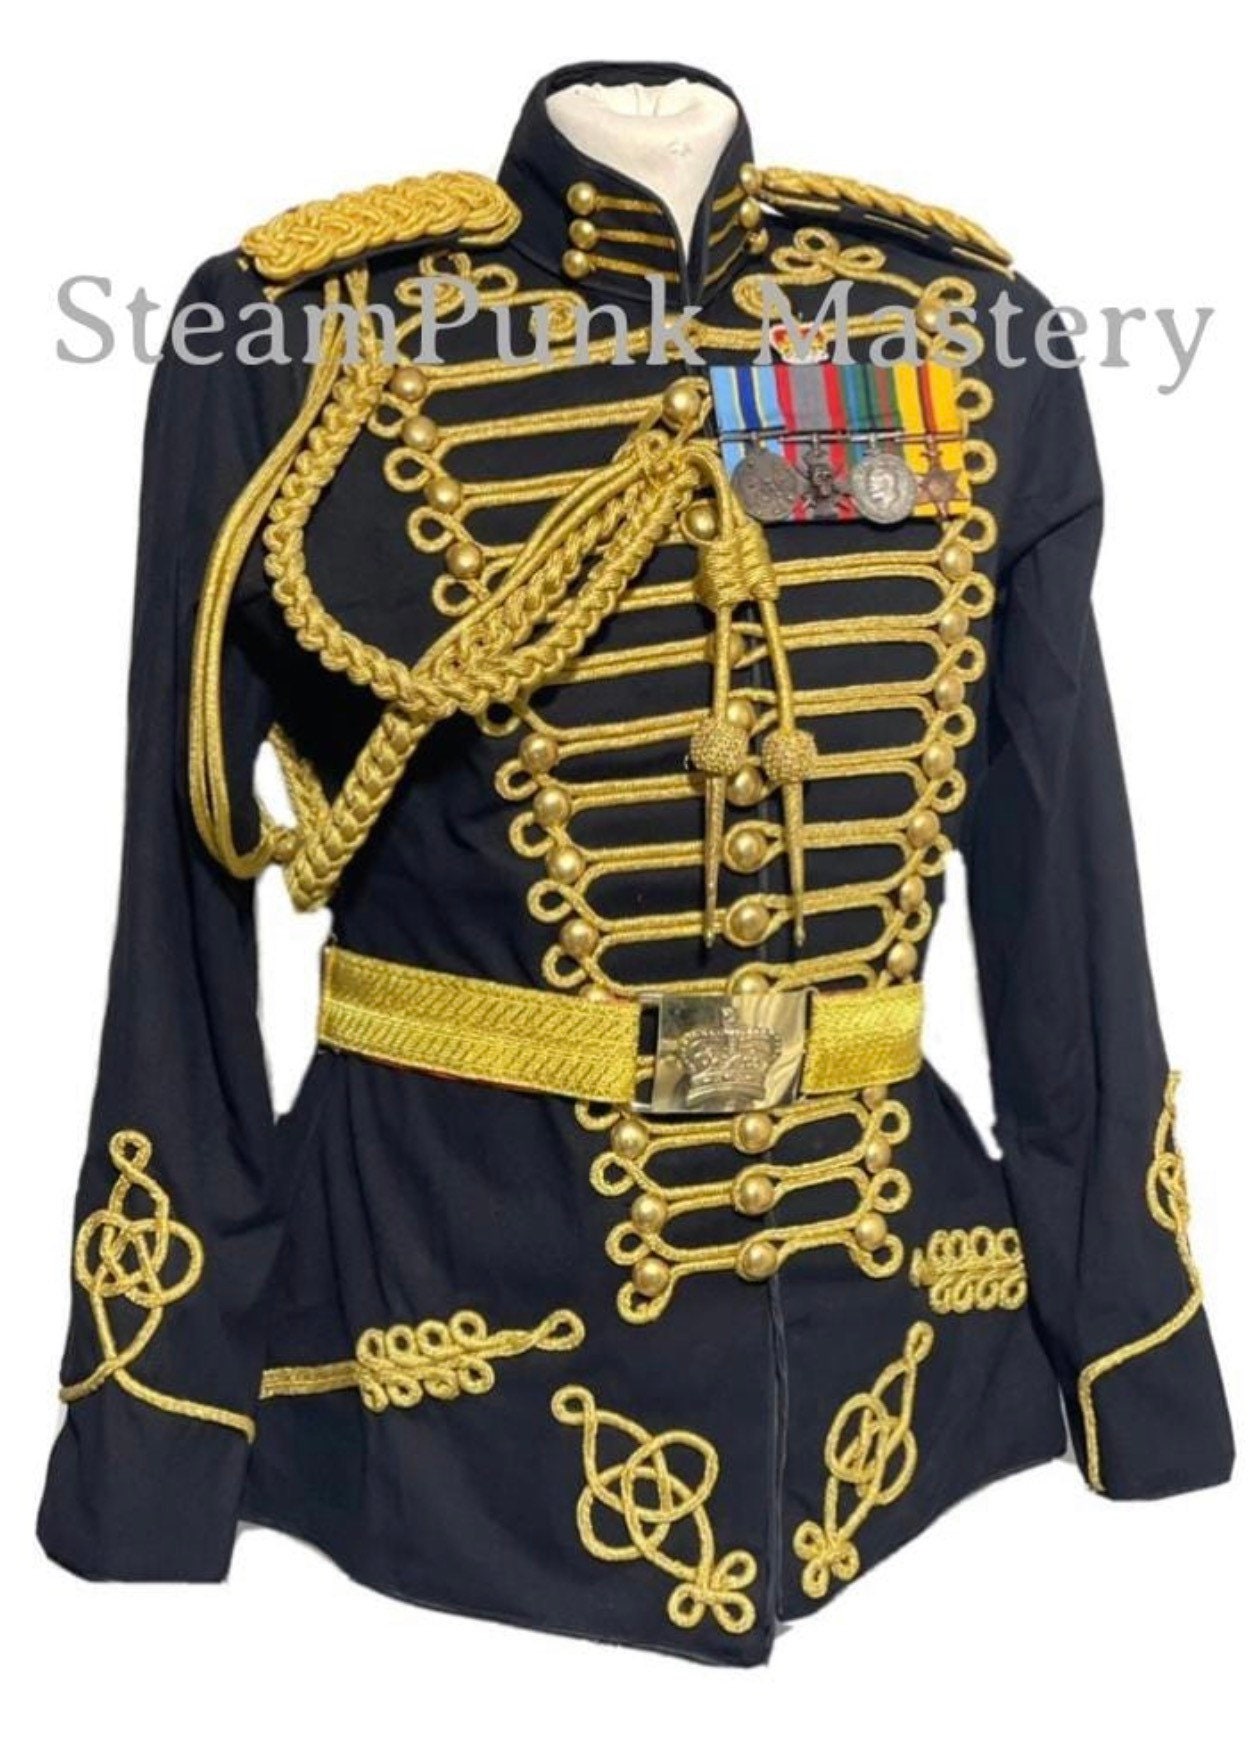 Pair of Braided Gold Cord Epaulettes - Hussar Military Jackets